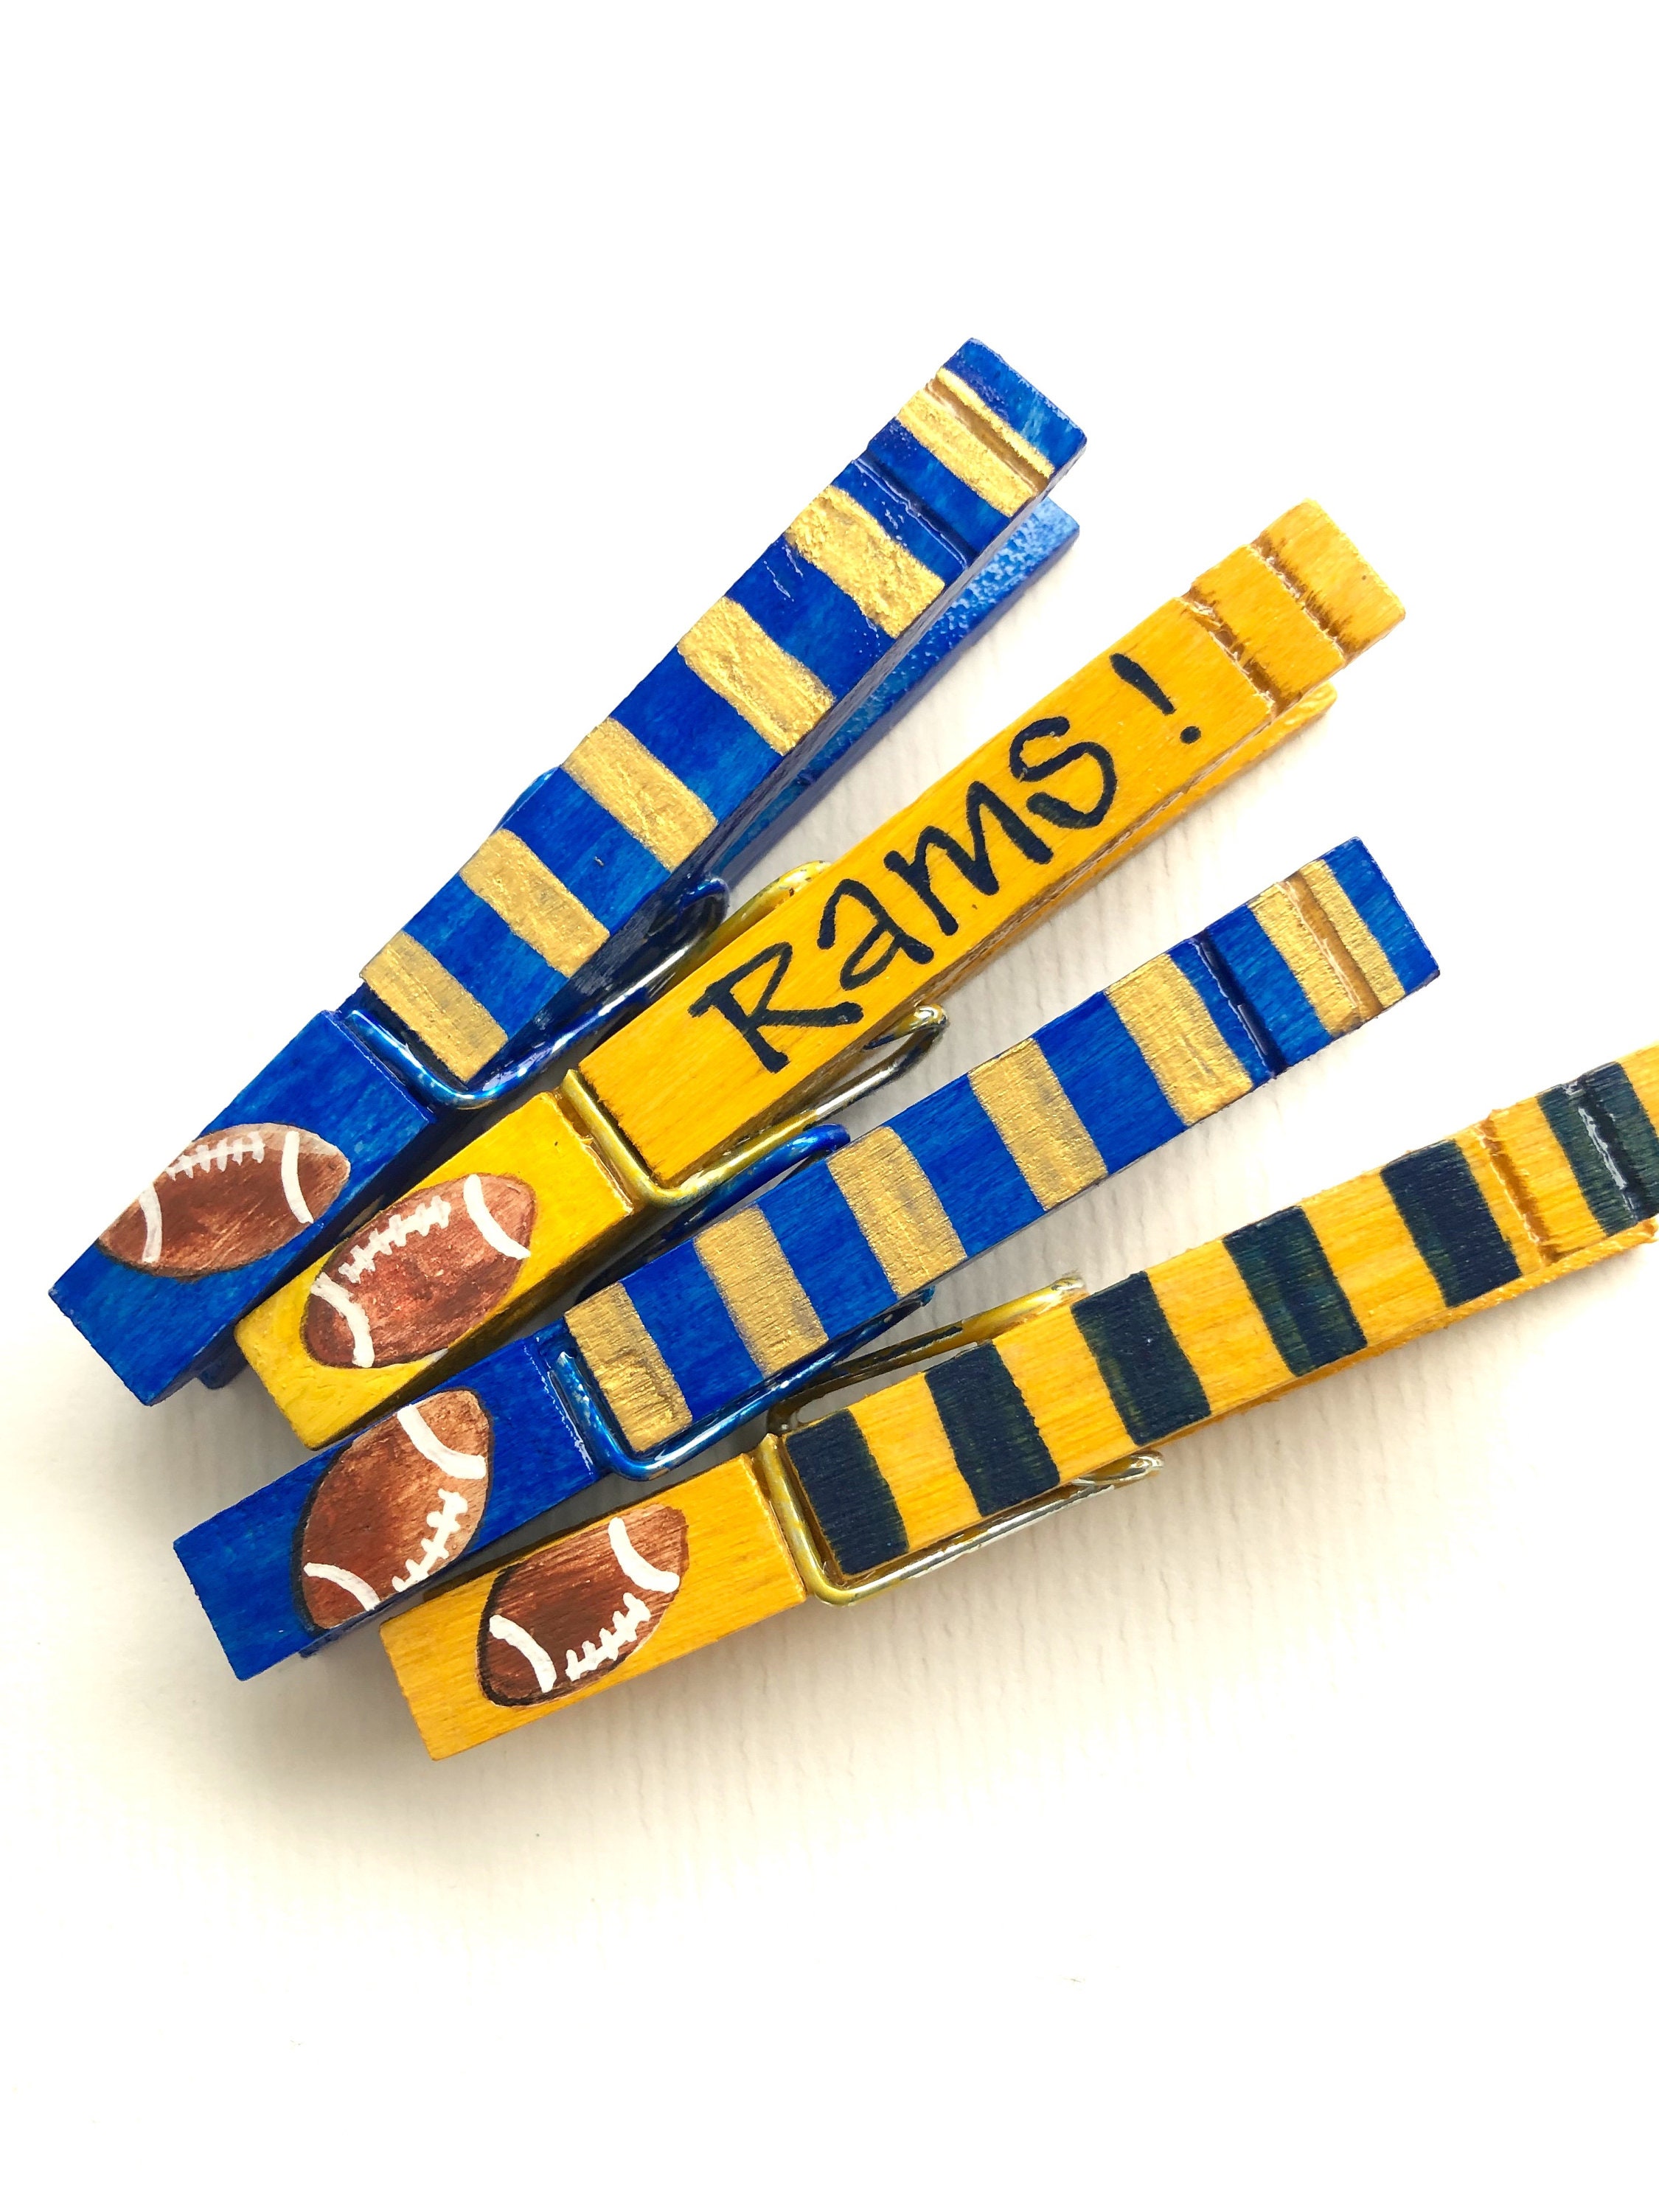 Los Angeles Rams Football Blue Gold Hand Painted Magnetic Clothespin Party Favor Team Football Fan Gift Nfl Memorabilia